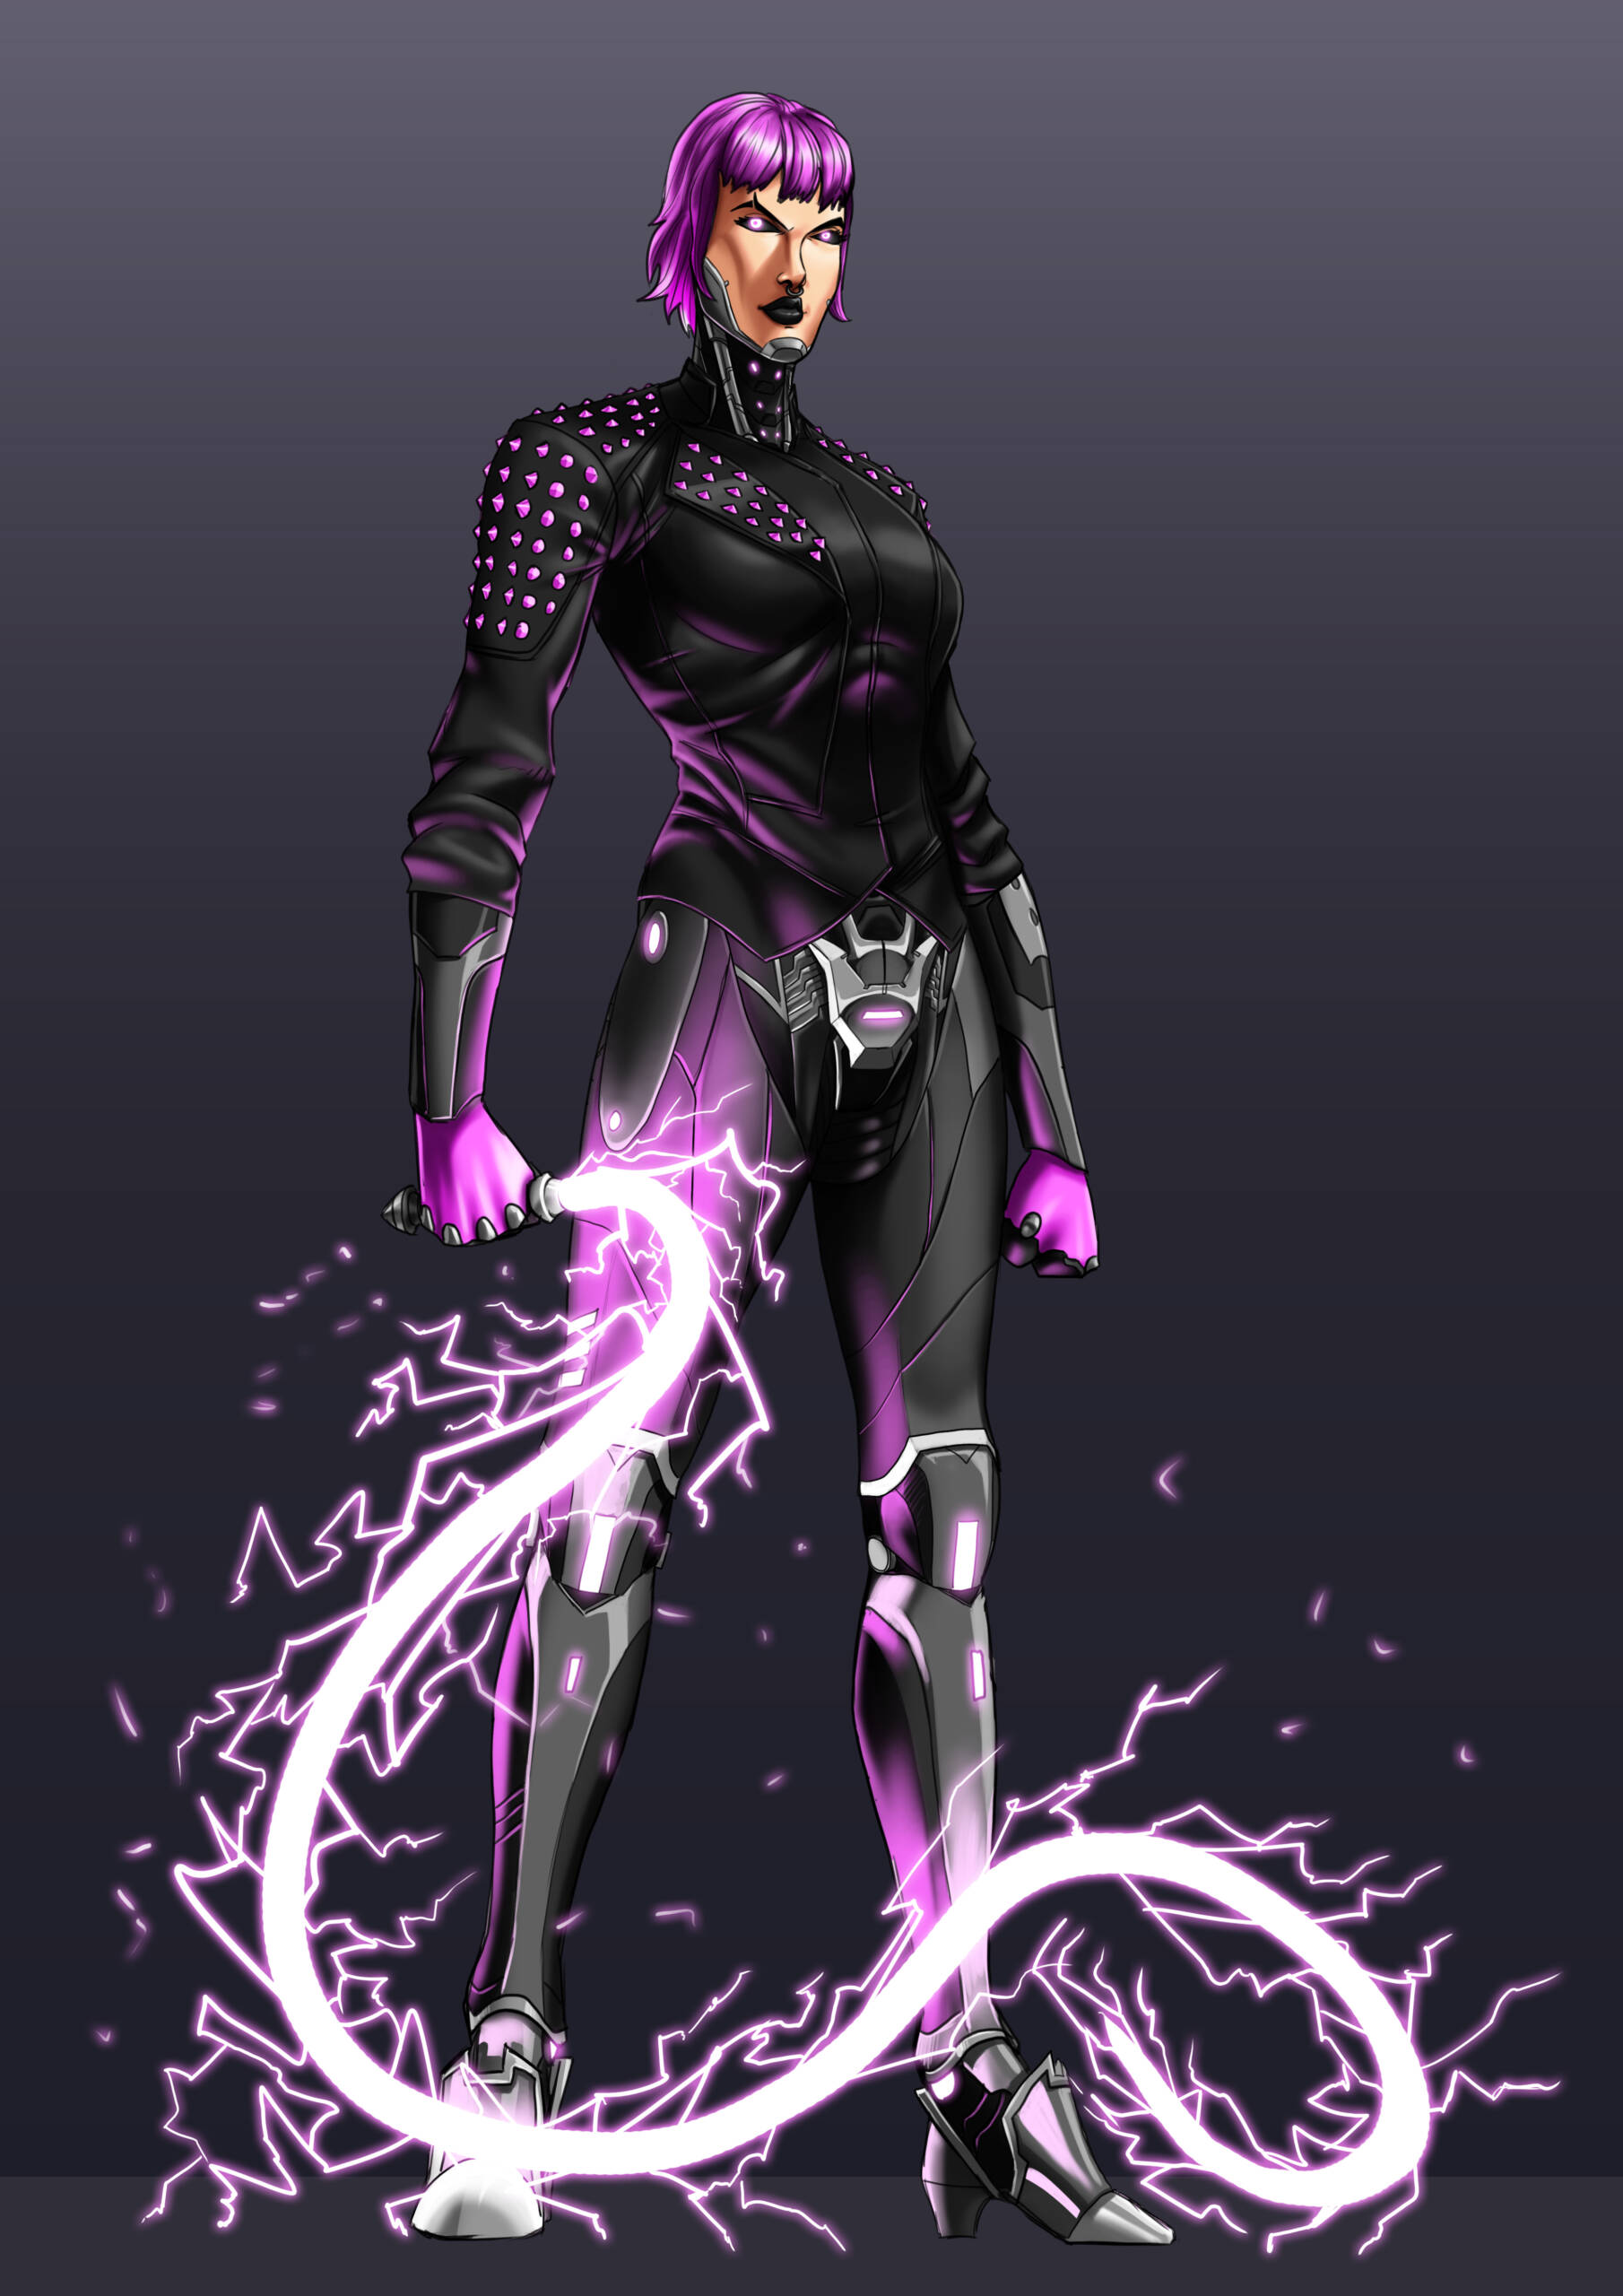 A purple and black character with lightning coming out of it.